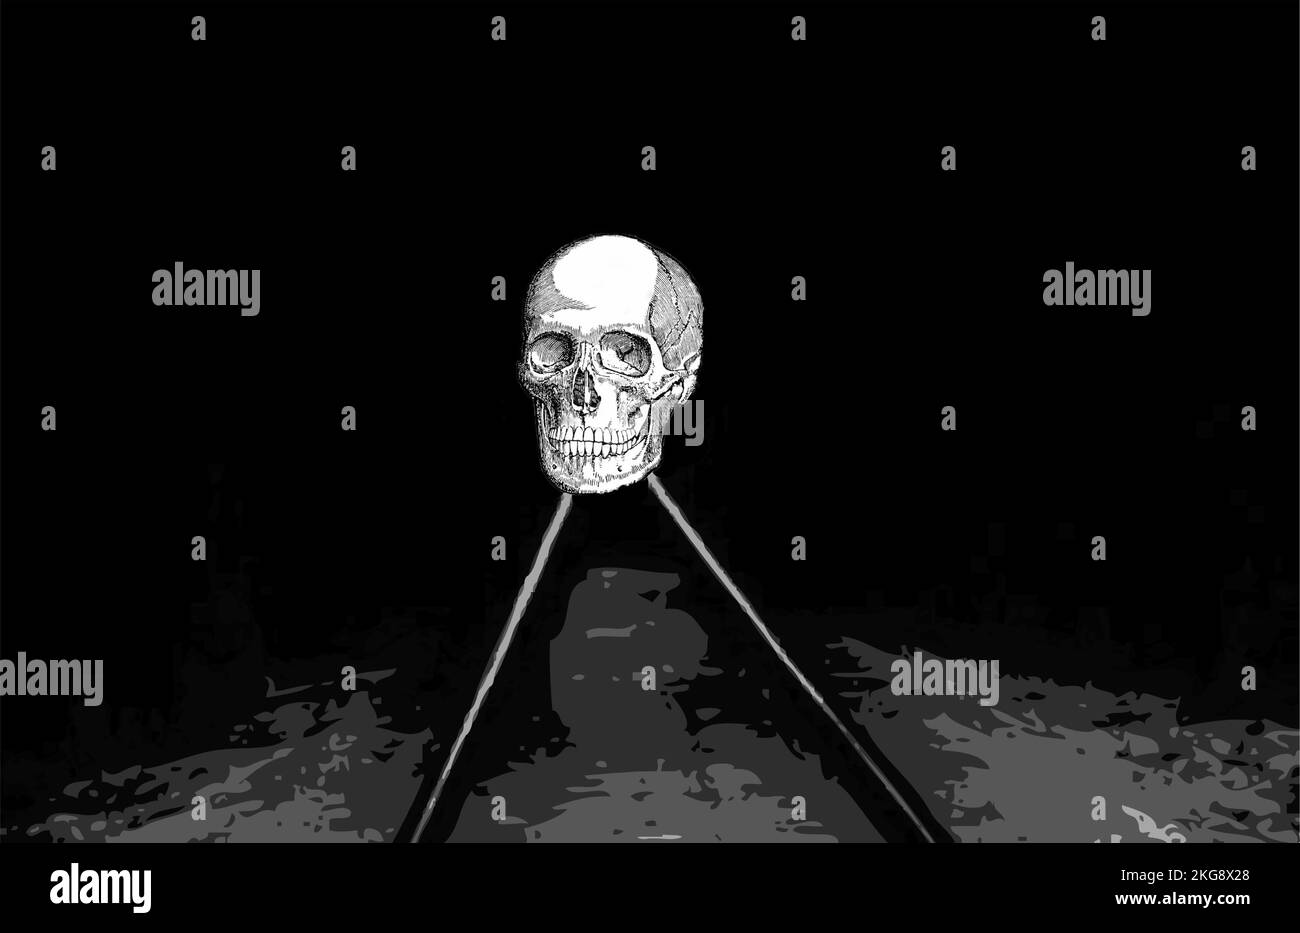 Skull on a black background, railroad tracks leading into the distance and darkness. Stock Vector